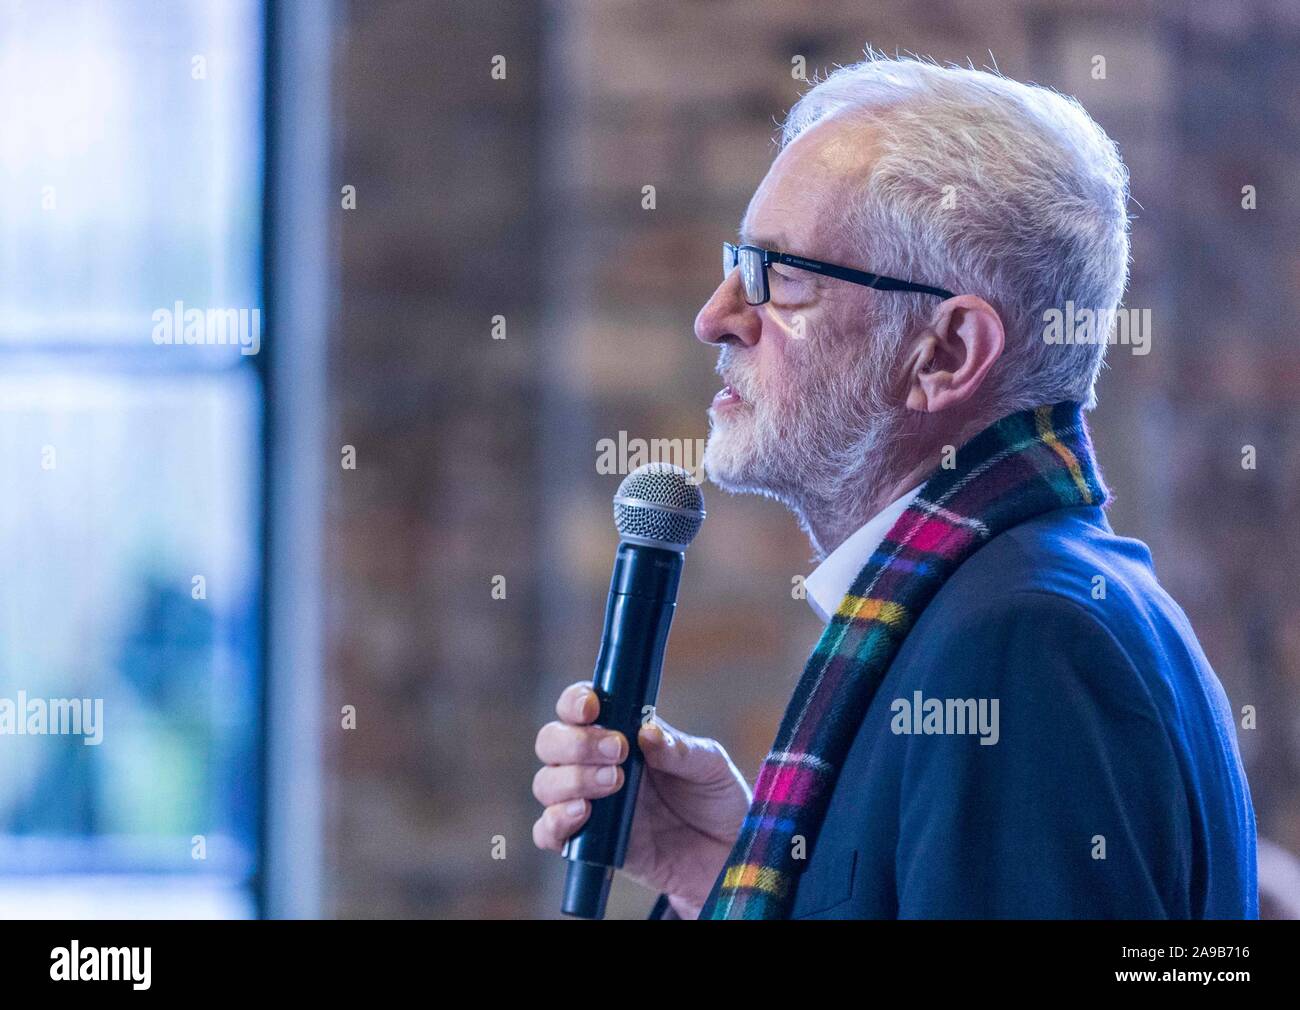 Newtongrange, United Kingdom. 14 November, 2019 Pictured: Jeremy Corbyn at National Mining Museum in Newtongrange. Labour leader, Jeremy Corbyn continues his visit to Scotland as part of his UK Election campaign. Credit: Rich Dyson/Alamy Live News Stock Photo